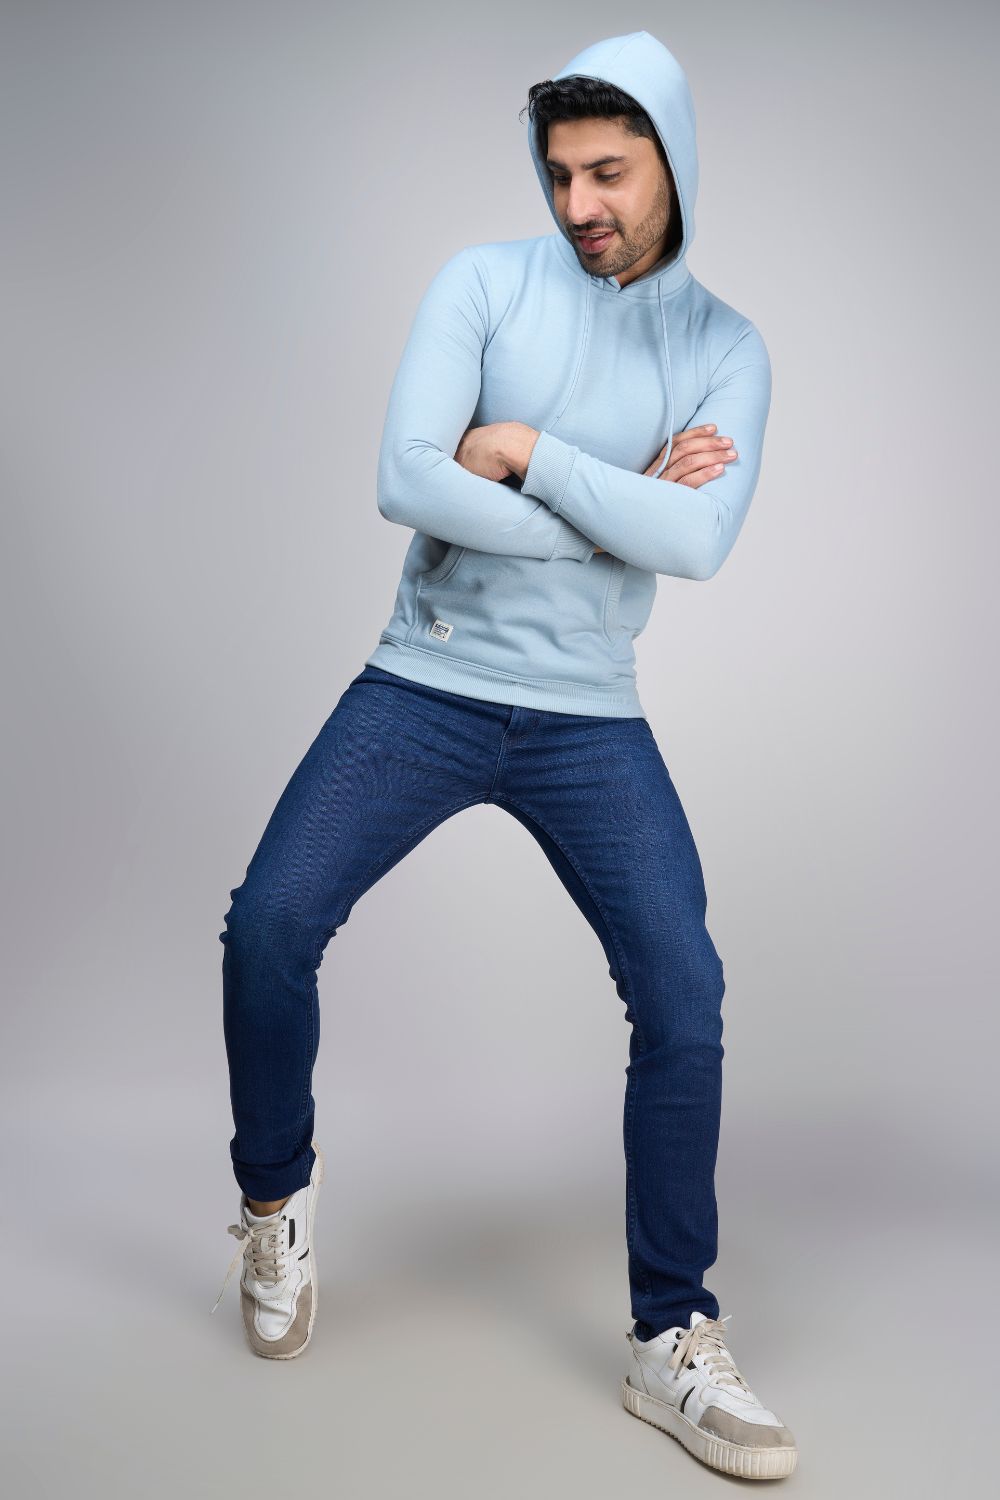 Shenghayo Blue colored, hoodie for men with full sleeves and relaxed fit.